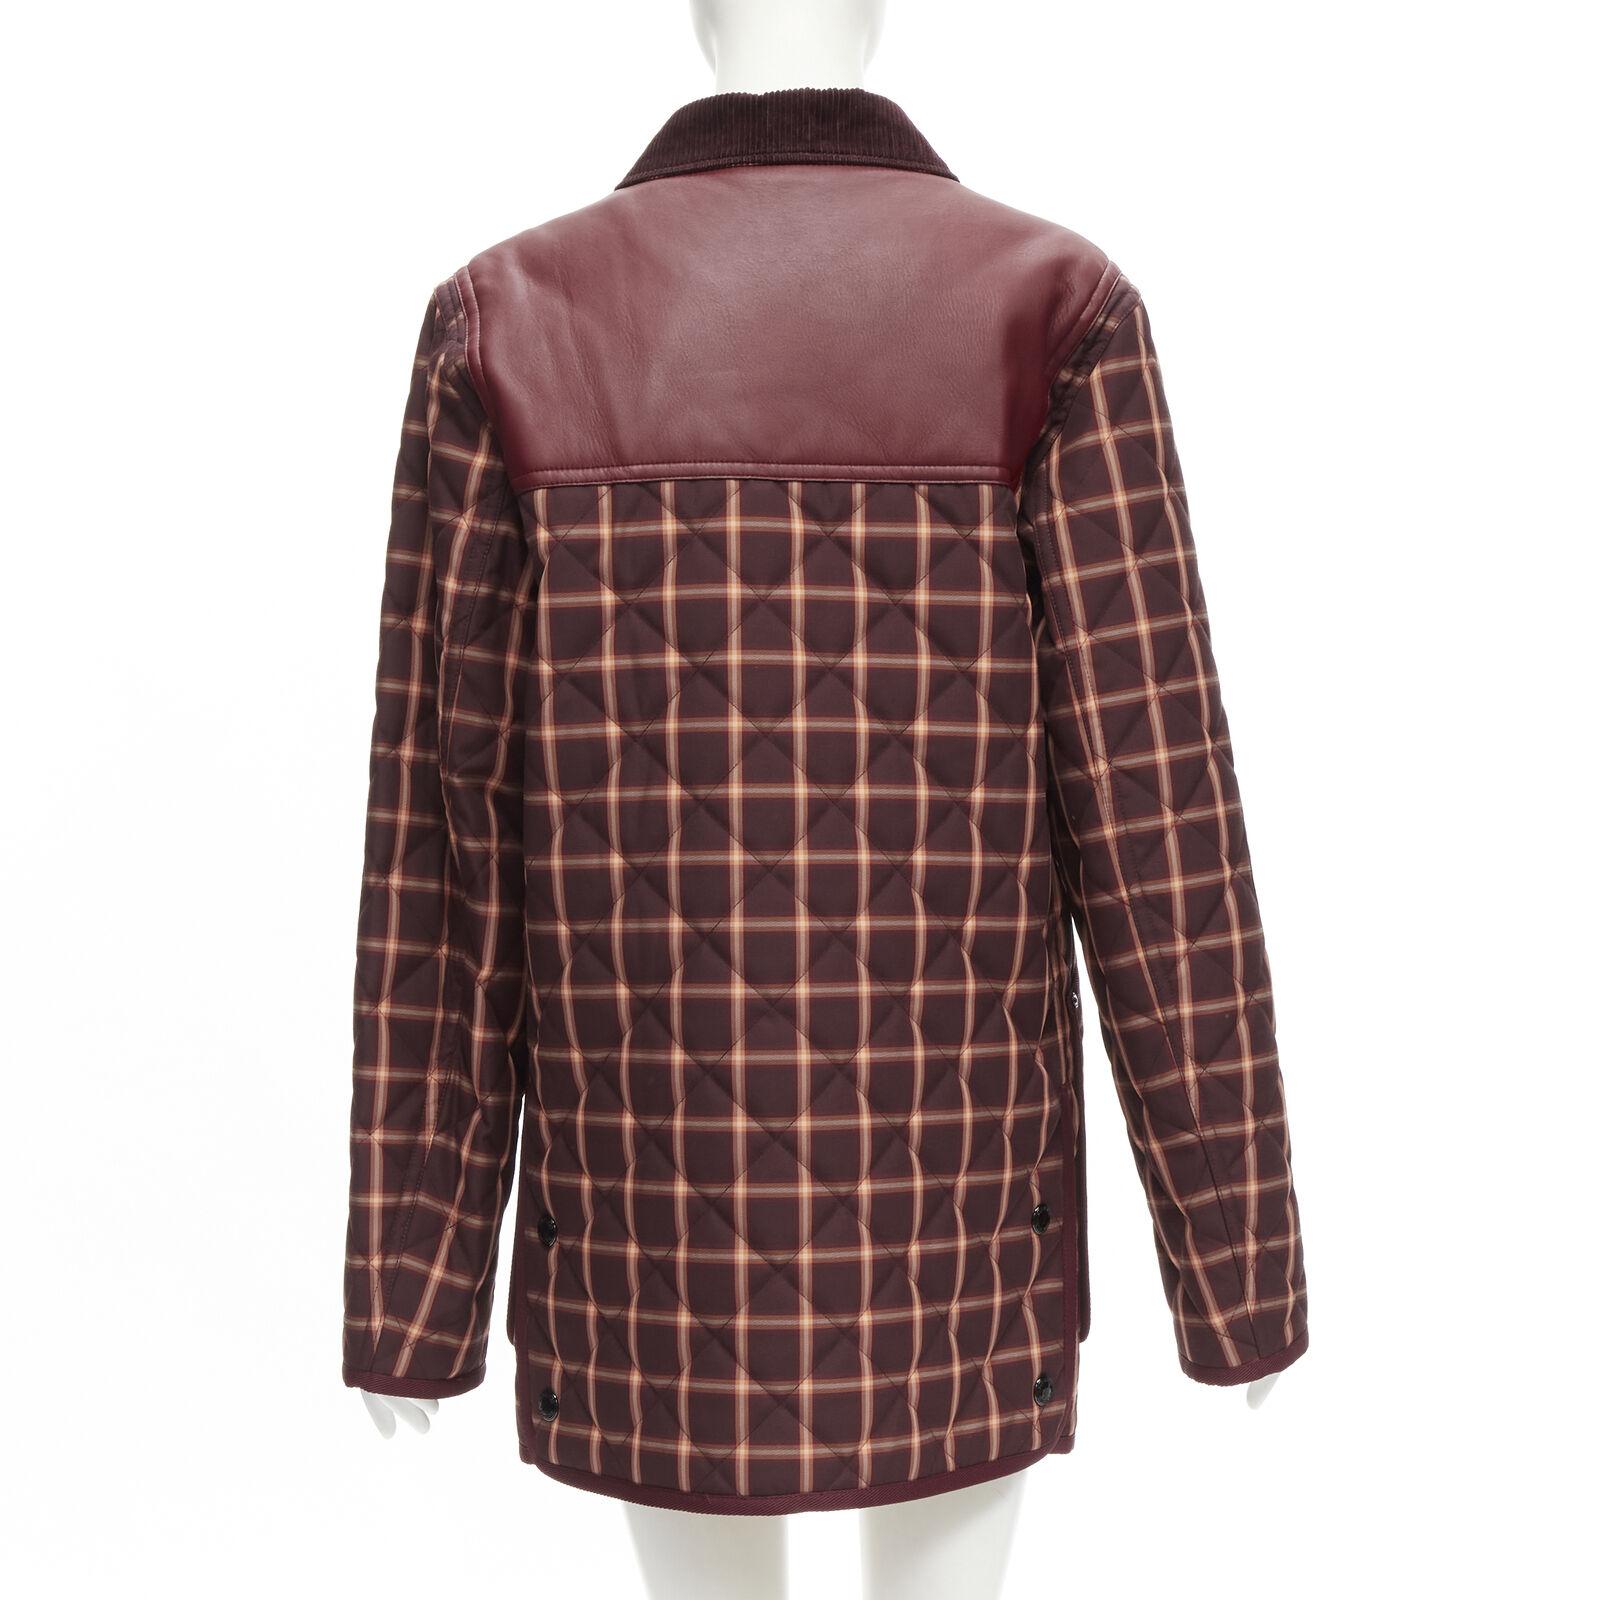 Men's new BURBERRY RICCARDO TISCI Reversible Burgundy Check leather patch jacket XS For Sale